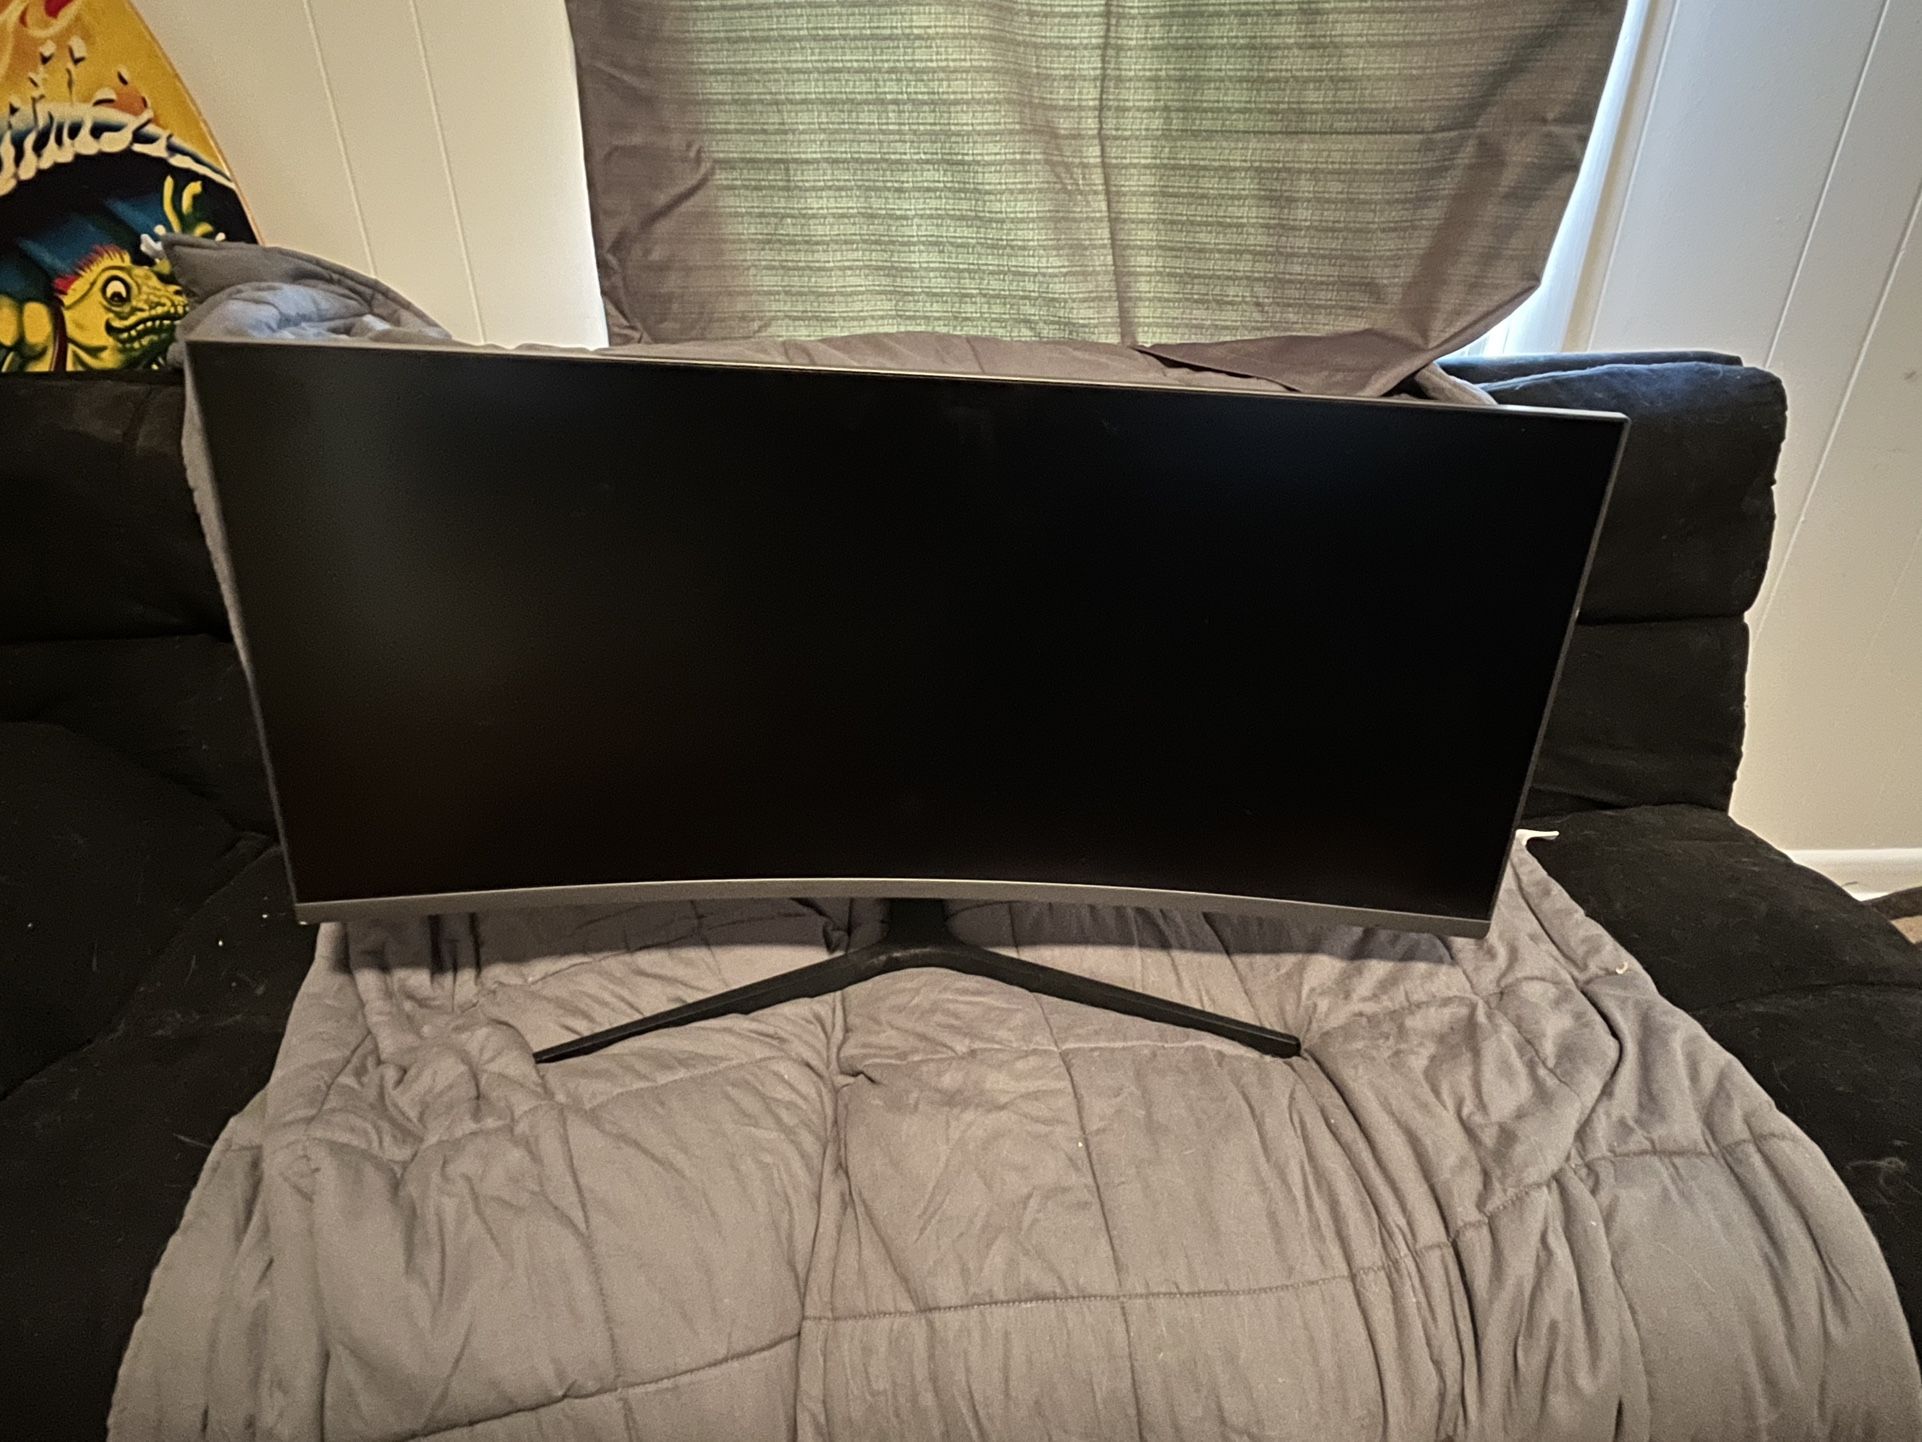 34-Inch Curved Monitor